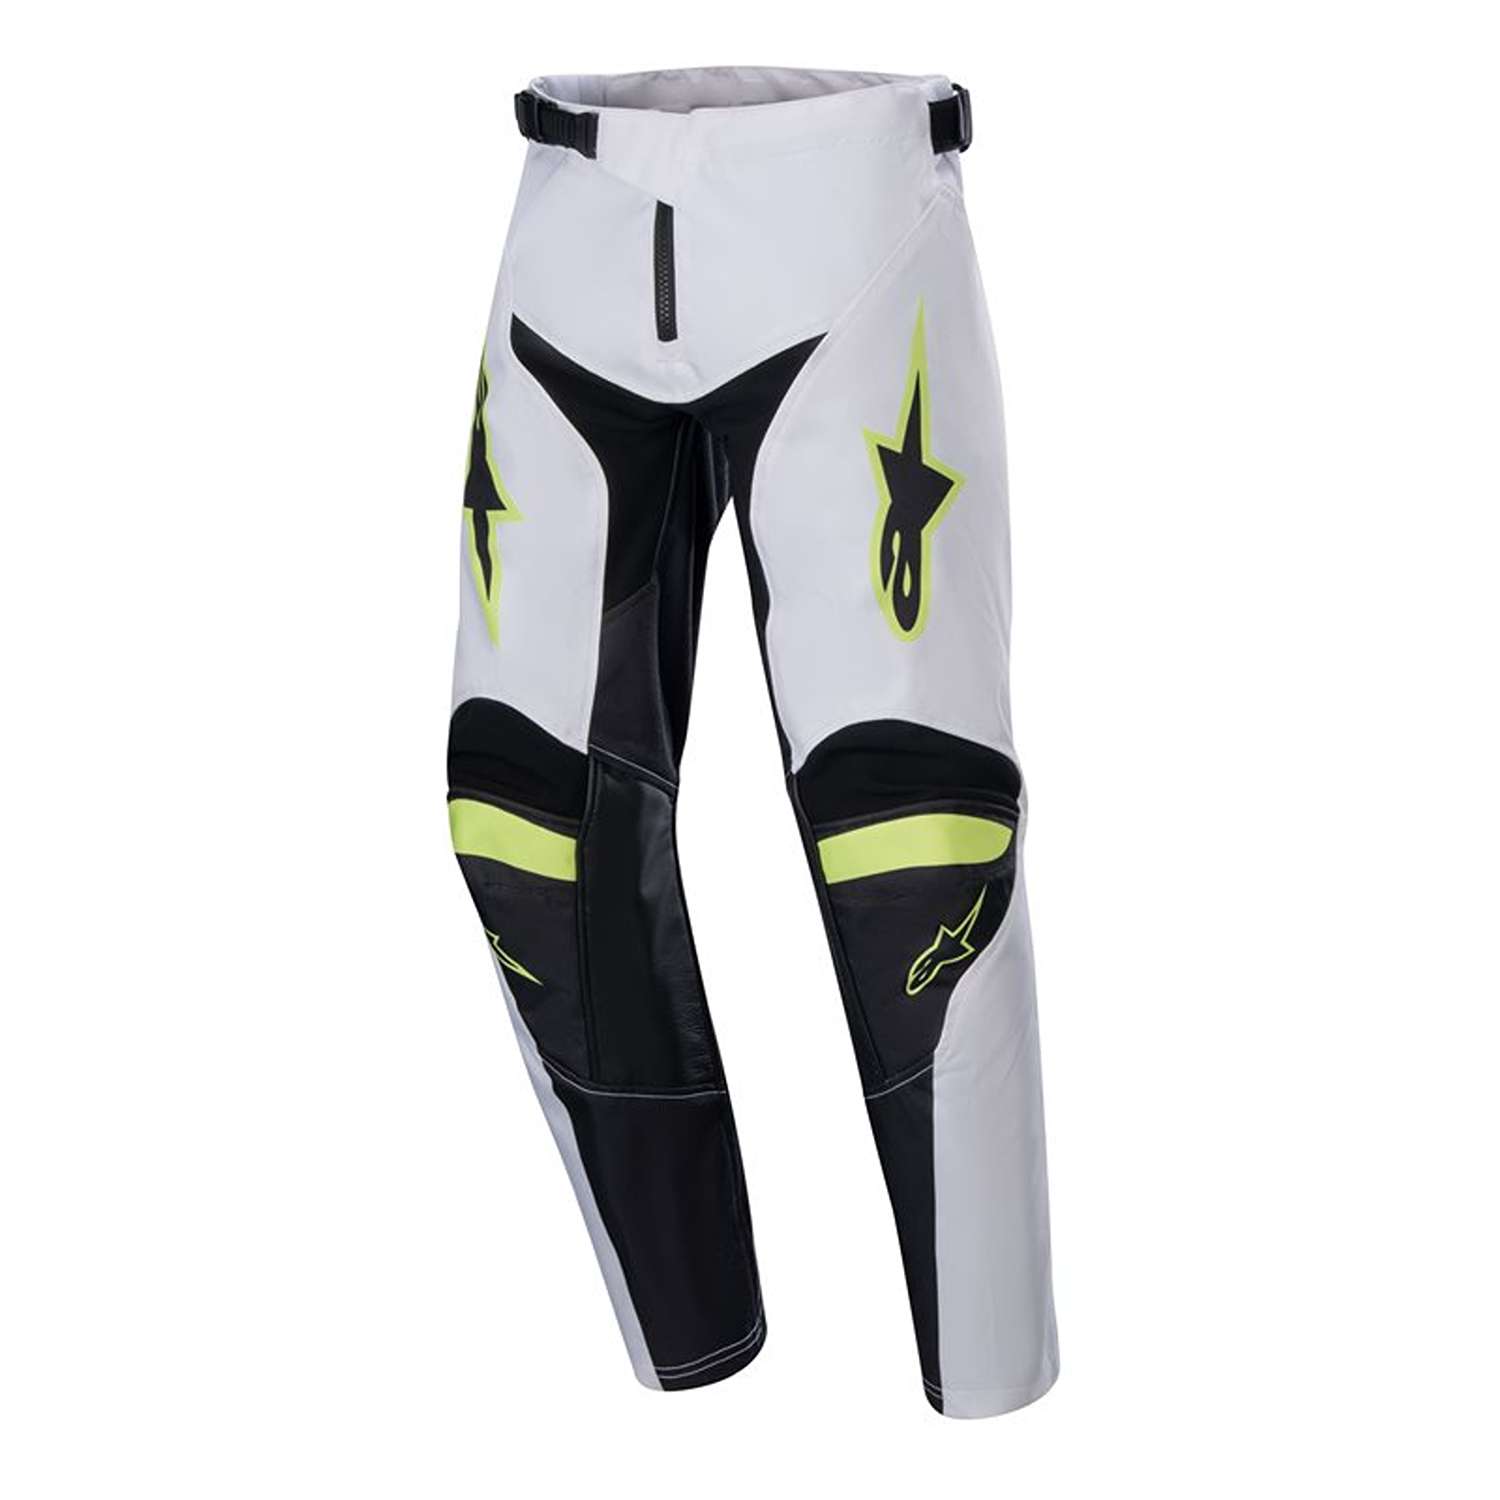 Image of Alpinestars Youth Racer Lucent Pants White Neon Red Yellow Fluo Talla 26